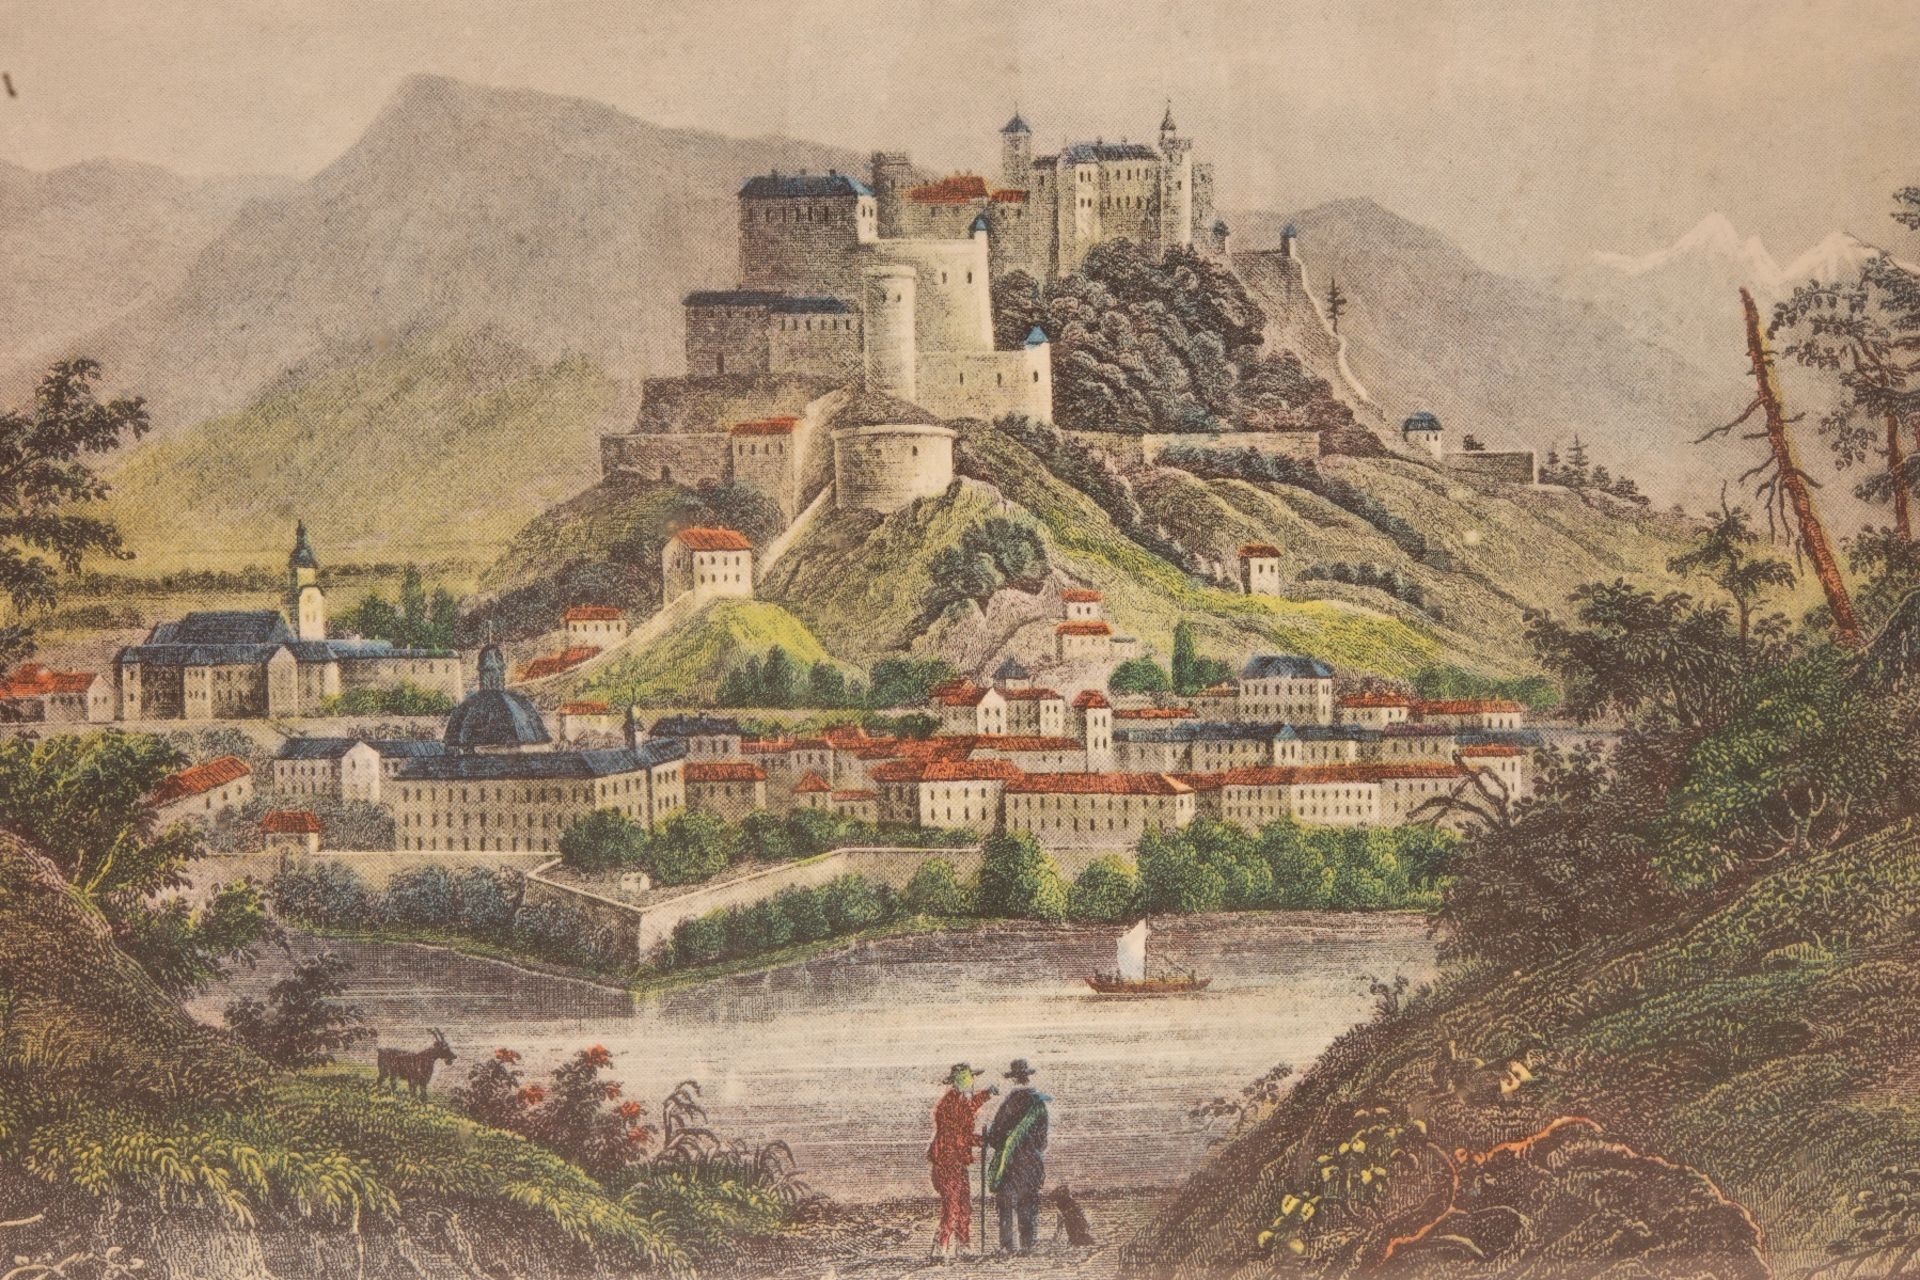 Artists of the 19th Century, Salzburg with Fortress Hohensalzburg on the Salzach River - Image 4 of 5